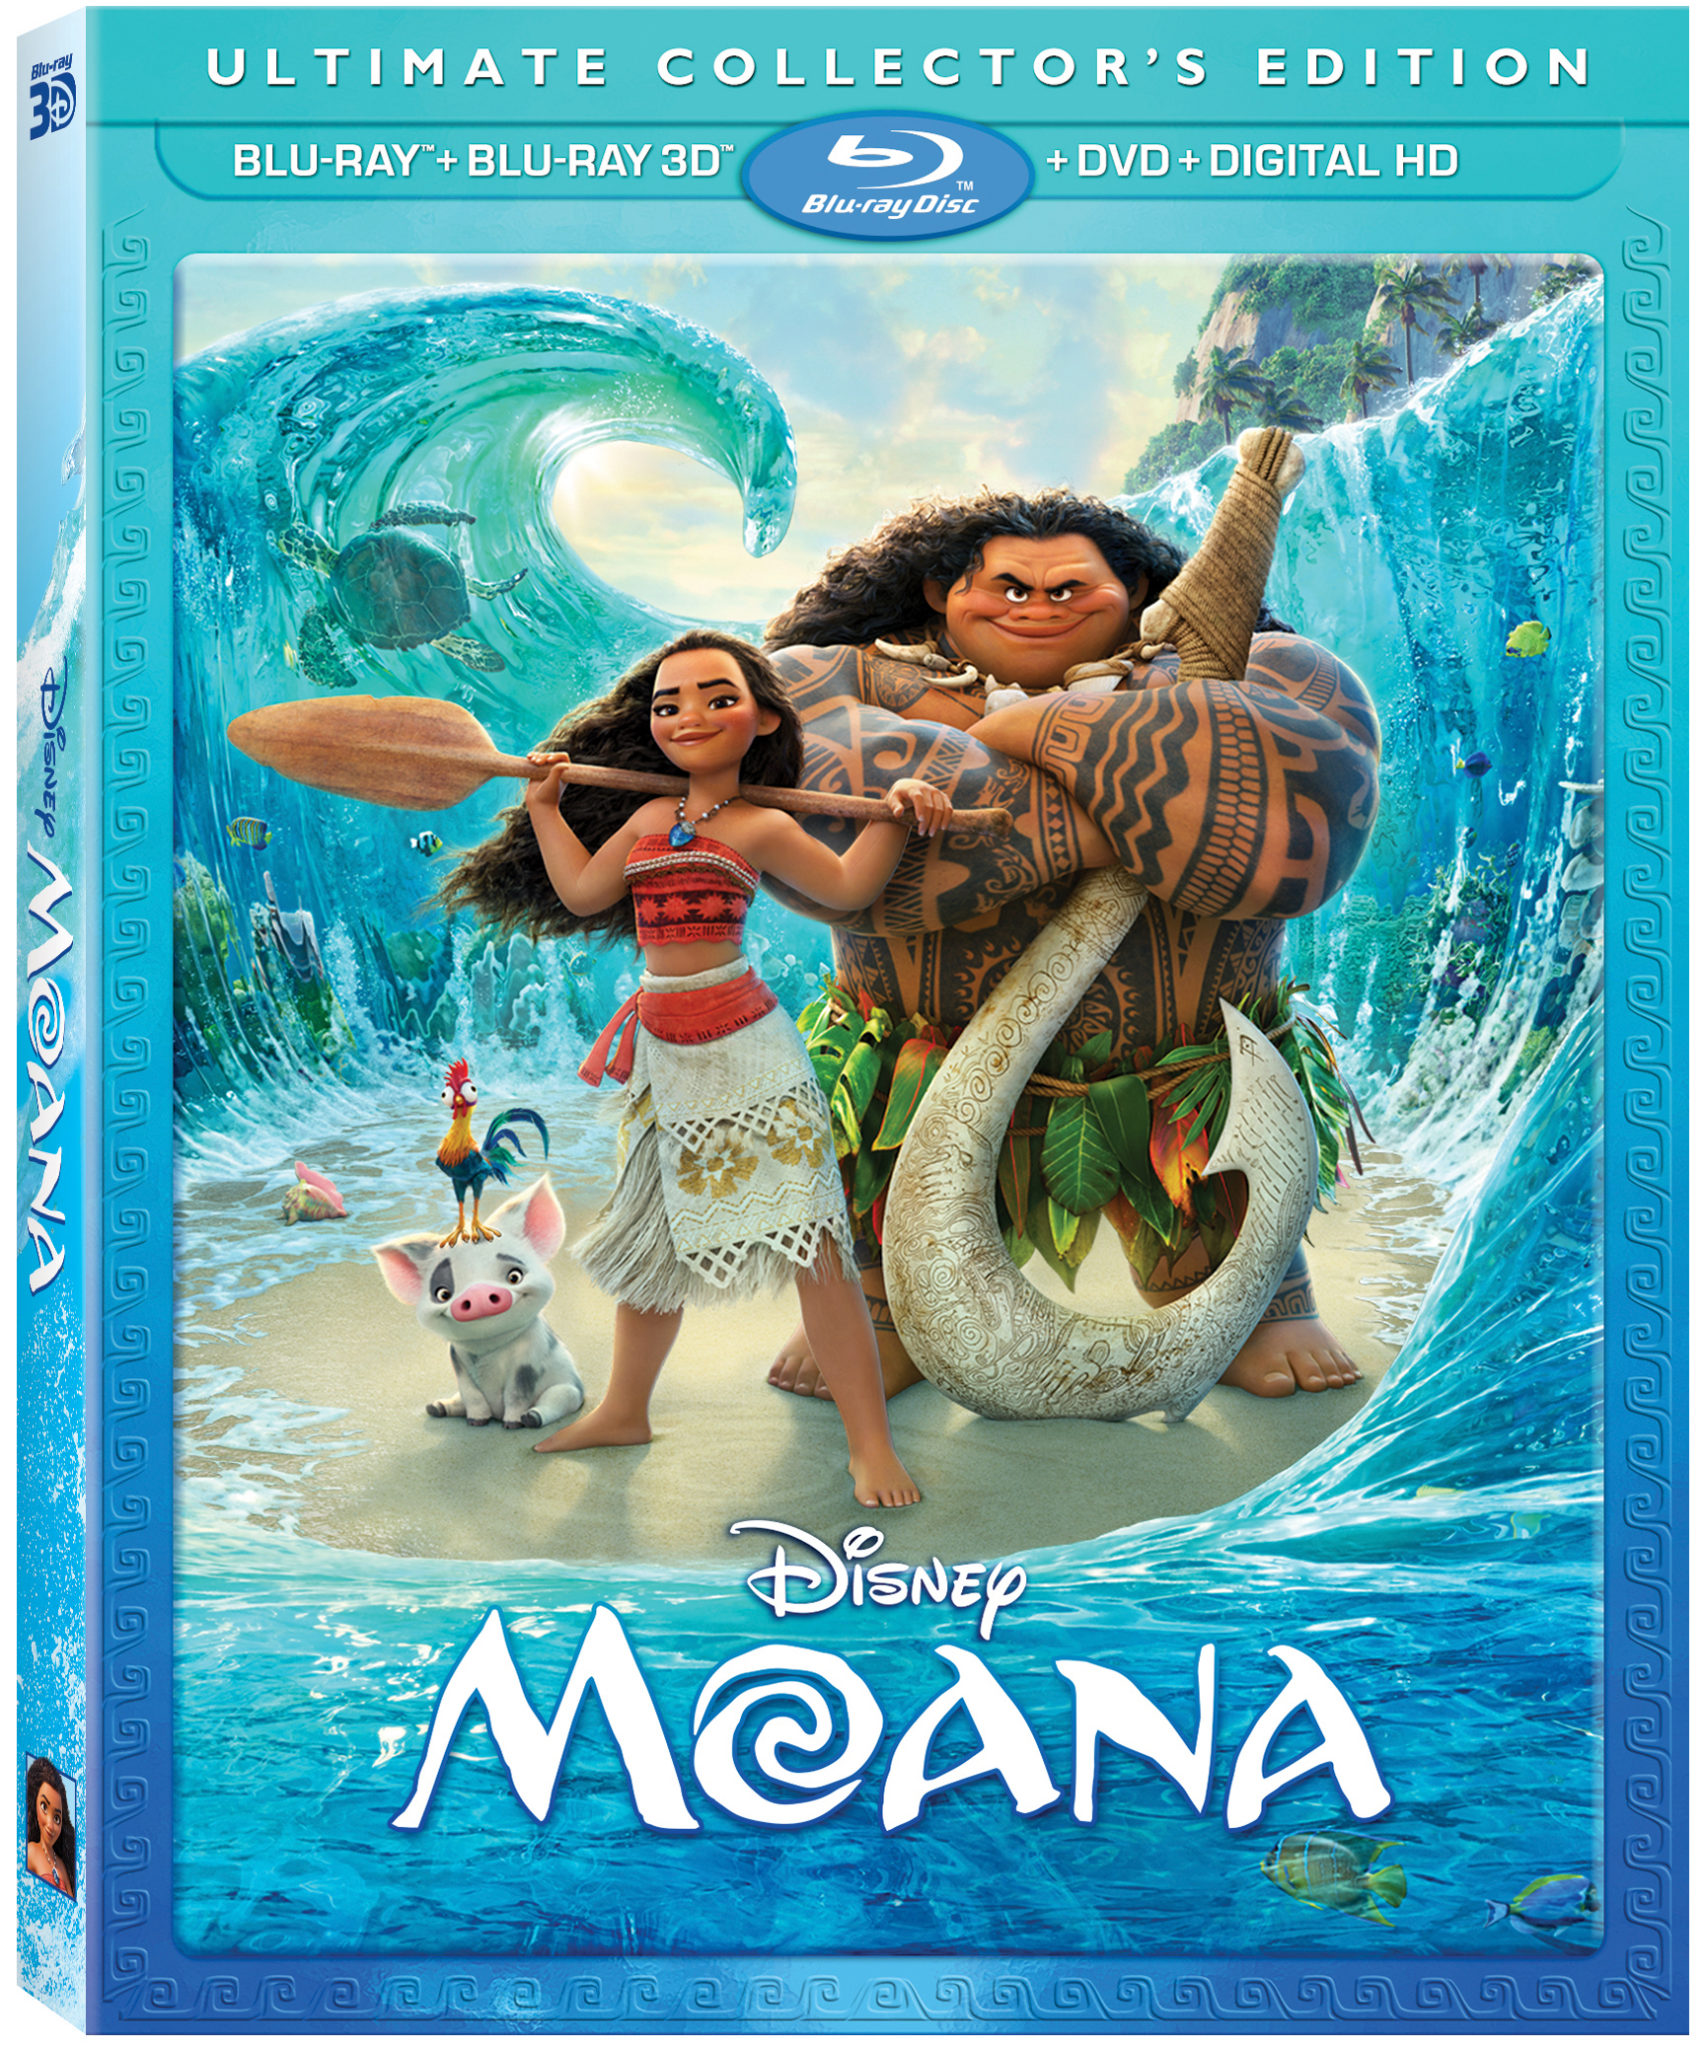 Set Your Sails “Moana” Is Coming To DVD, Blu-ray And On-Demand!